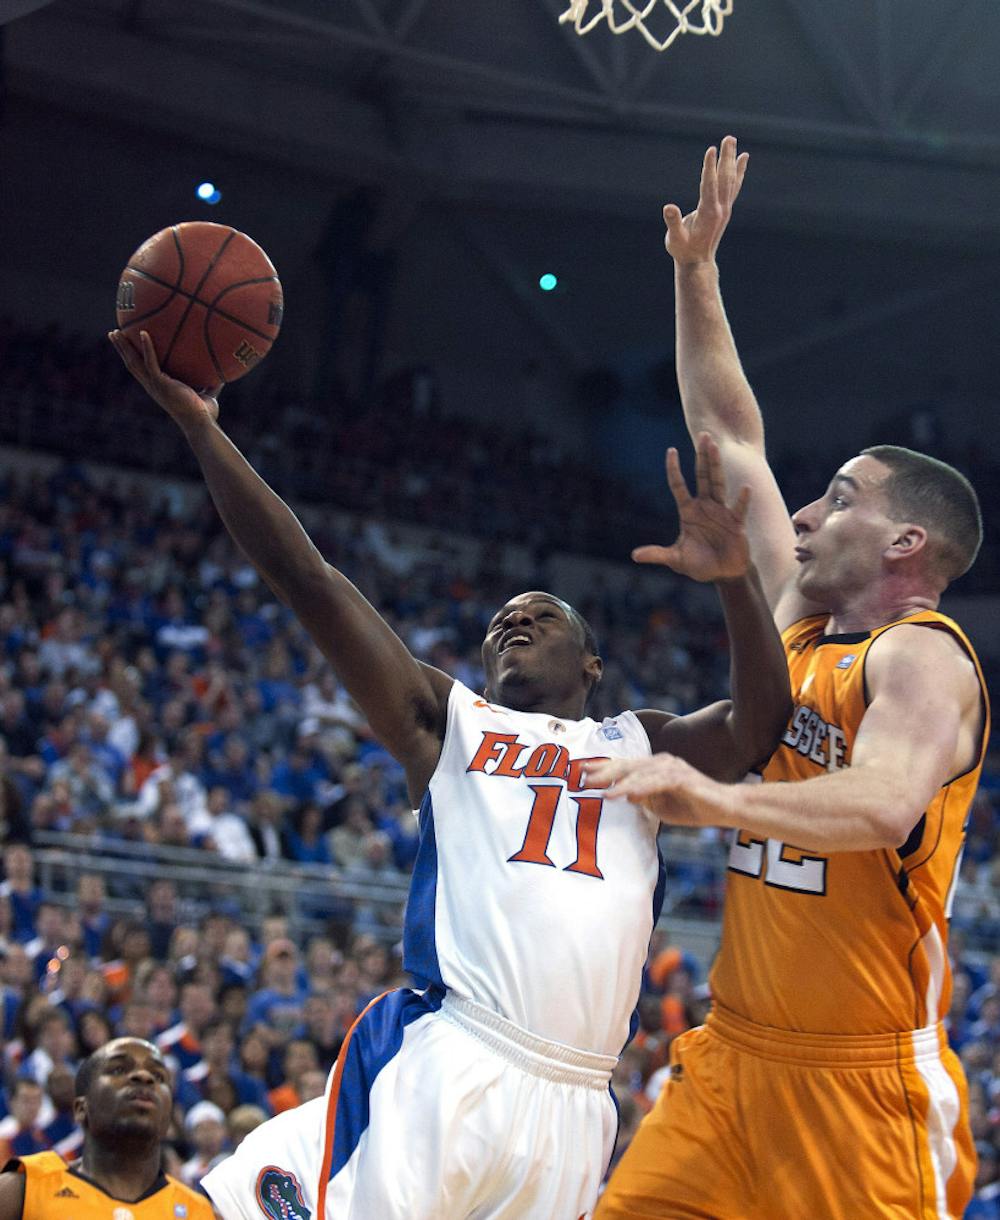 Florida guard Erving Walker goes to the hoop against Tennessee’s Steven Pearl in UF’s 61-60 win Saturday in the O’Connell Center.